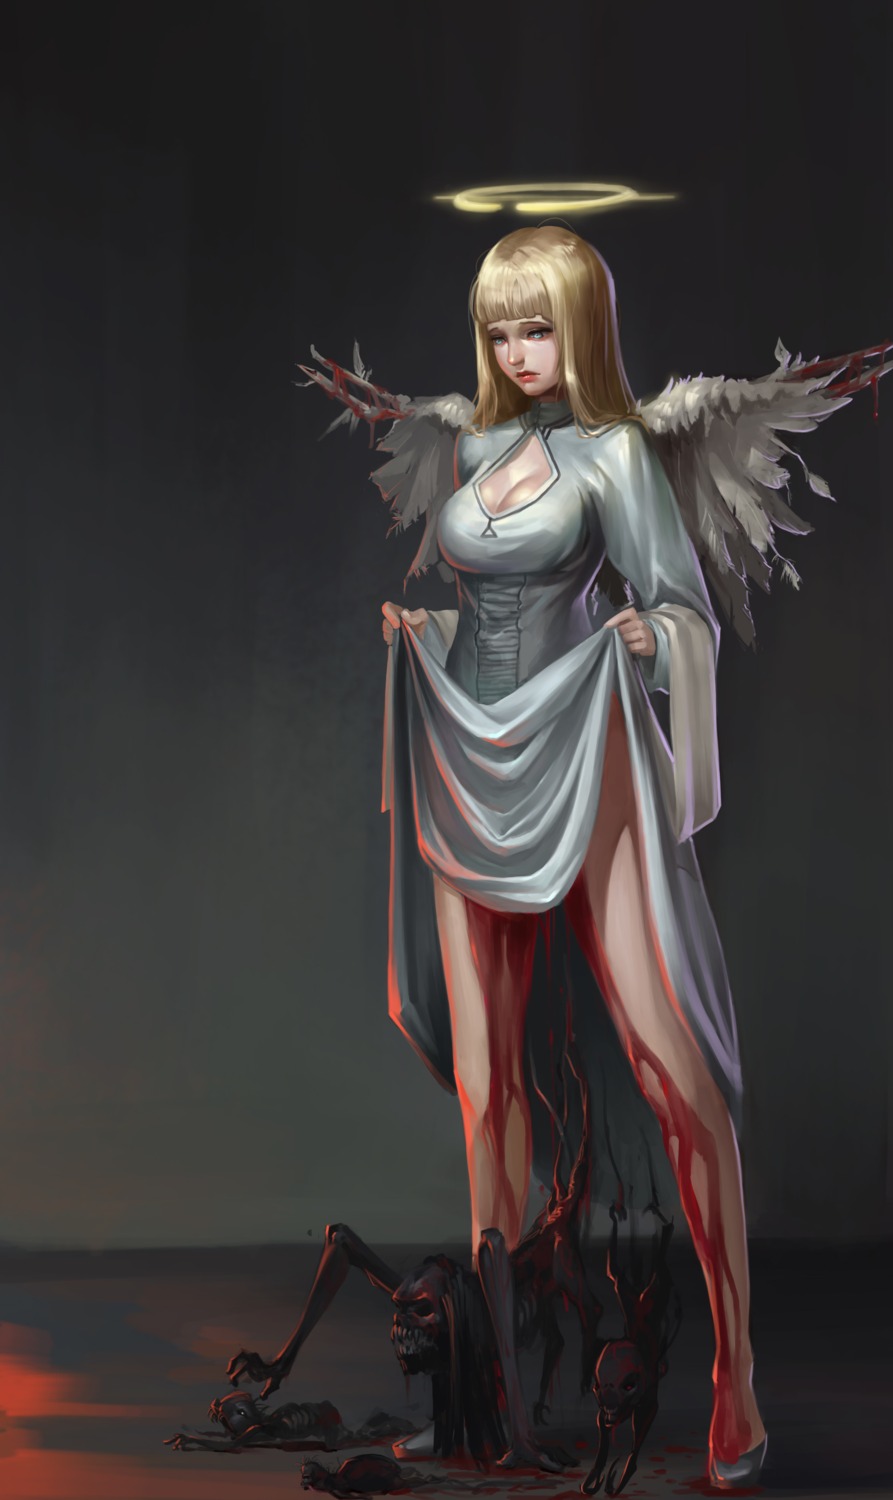 blood cleavage dress extreme_content guro heels midfinger22 skirt_lift wings